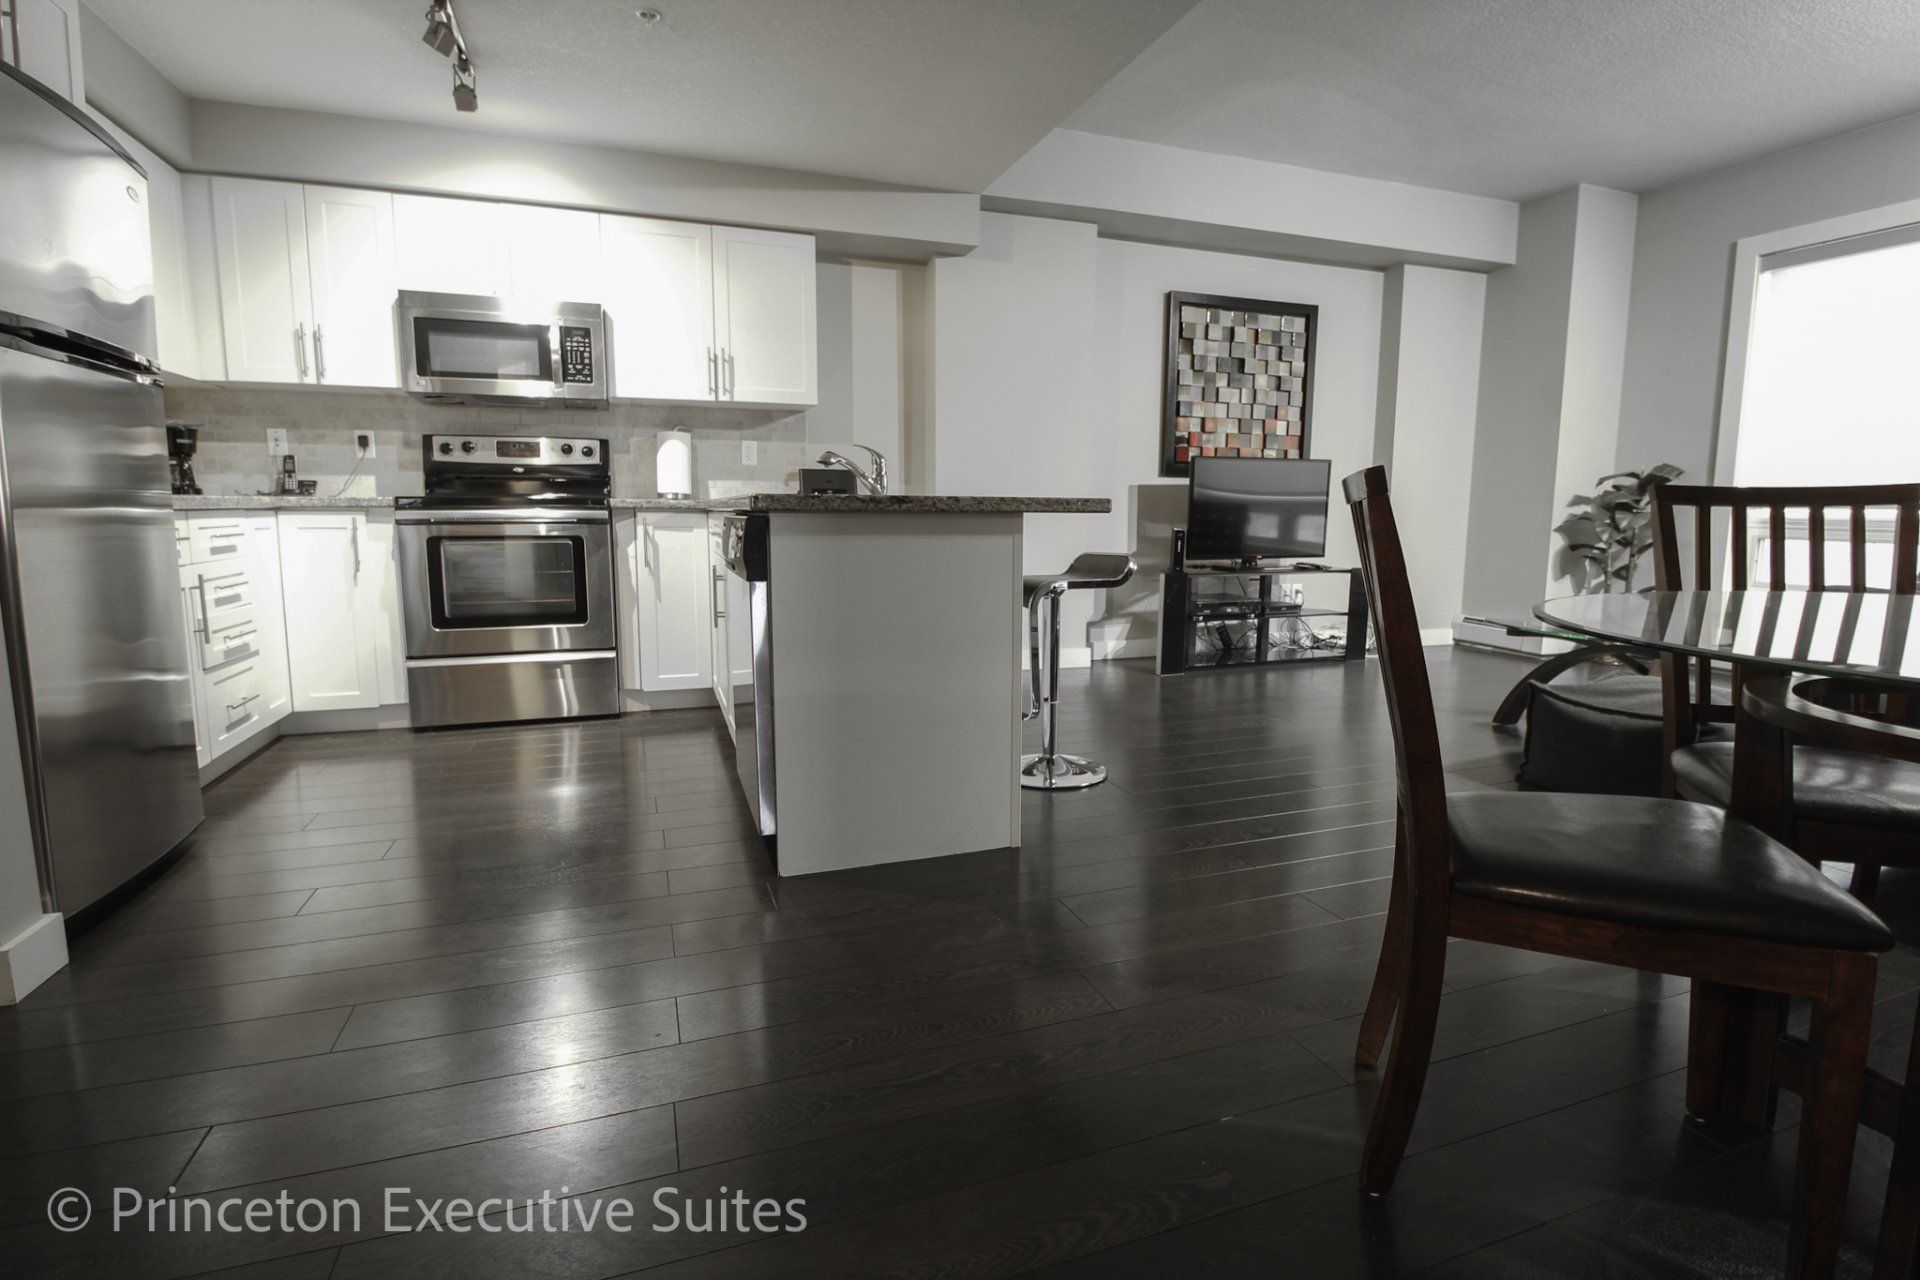 Dark hardwood flooring white contrasting kitchen cupboards and stainless steel appliances are a feature of this Edmonton furnished suite